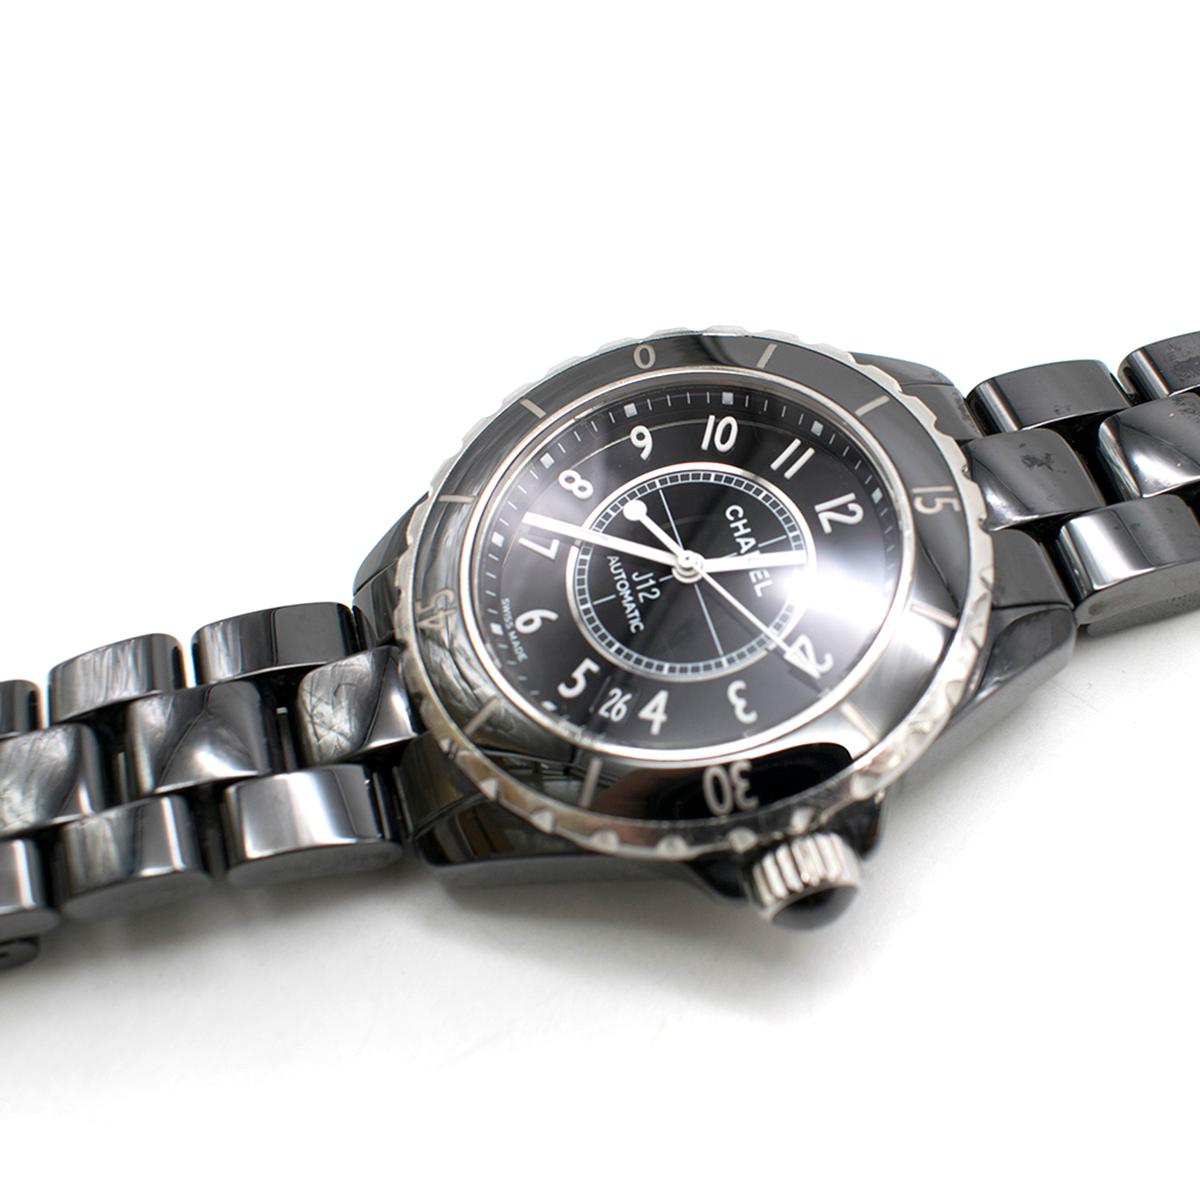 Chanel Black and Silver J12 Automatic Watch 4